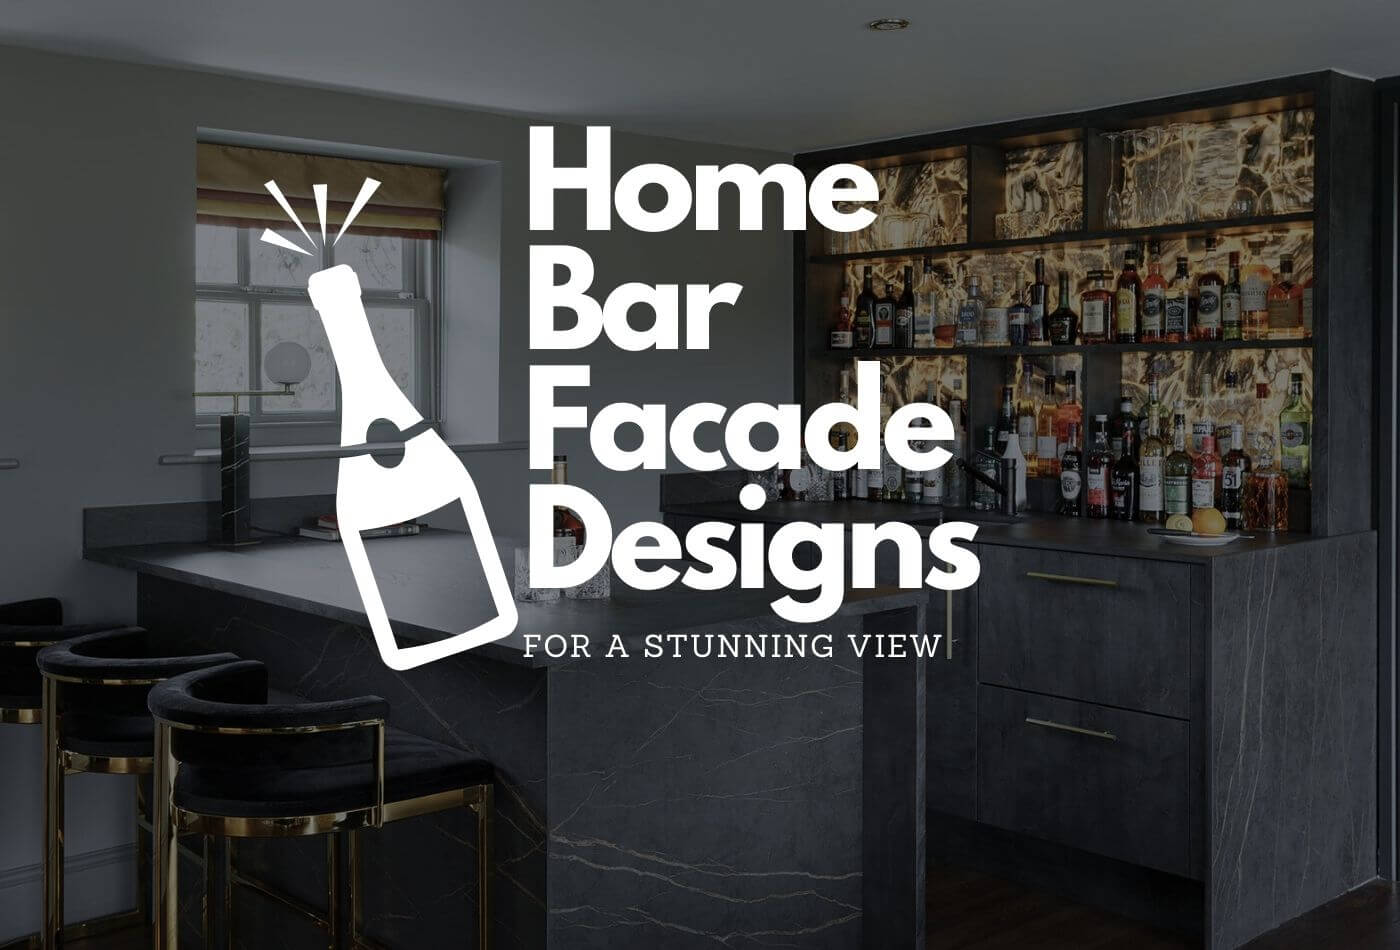 Explore These Home Bar Facades Designs For A Stunning View